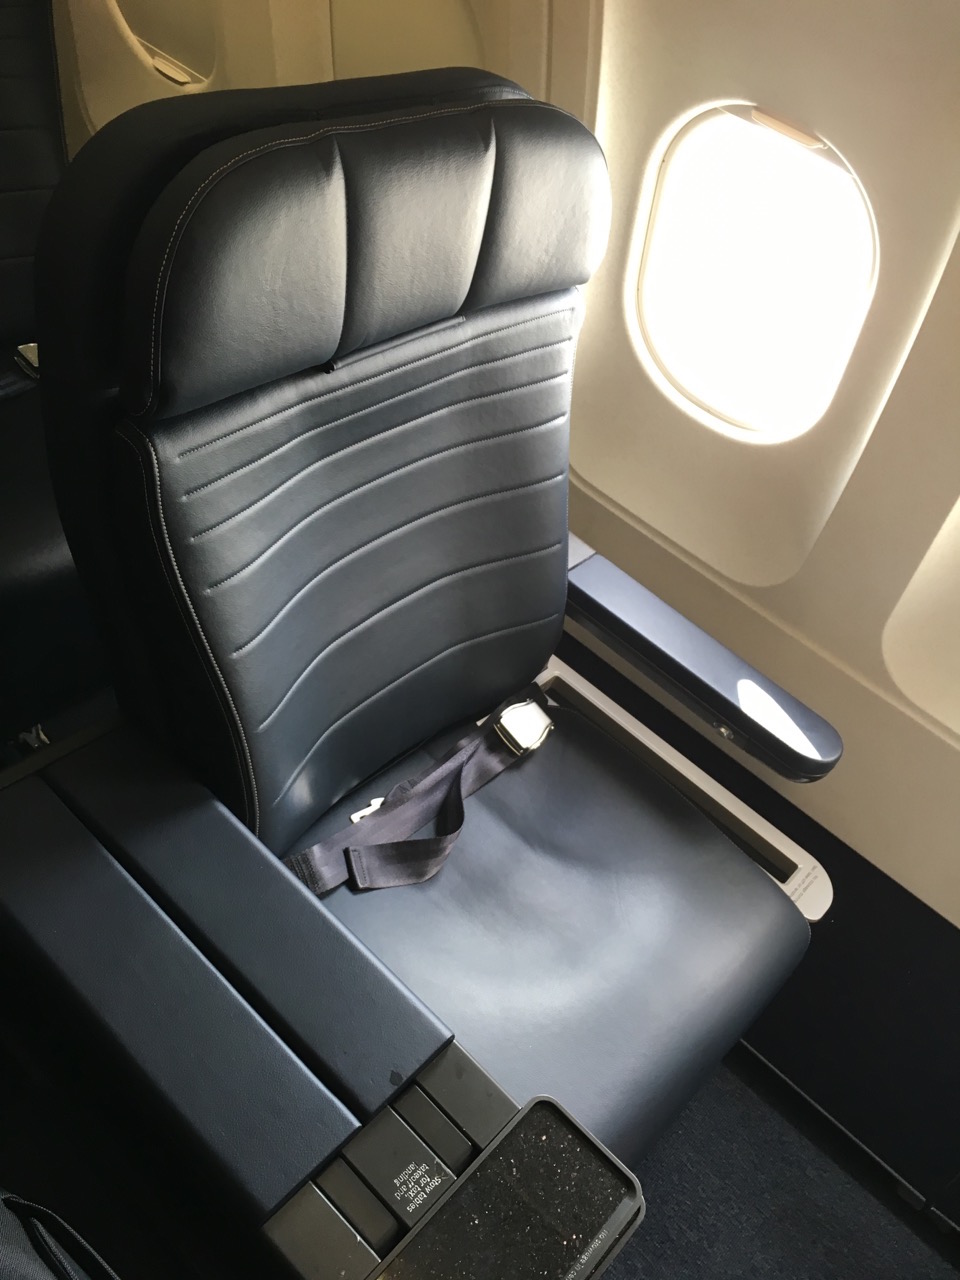 New United Airlines Domestic First Class